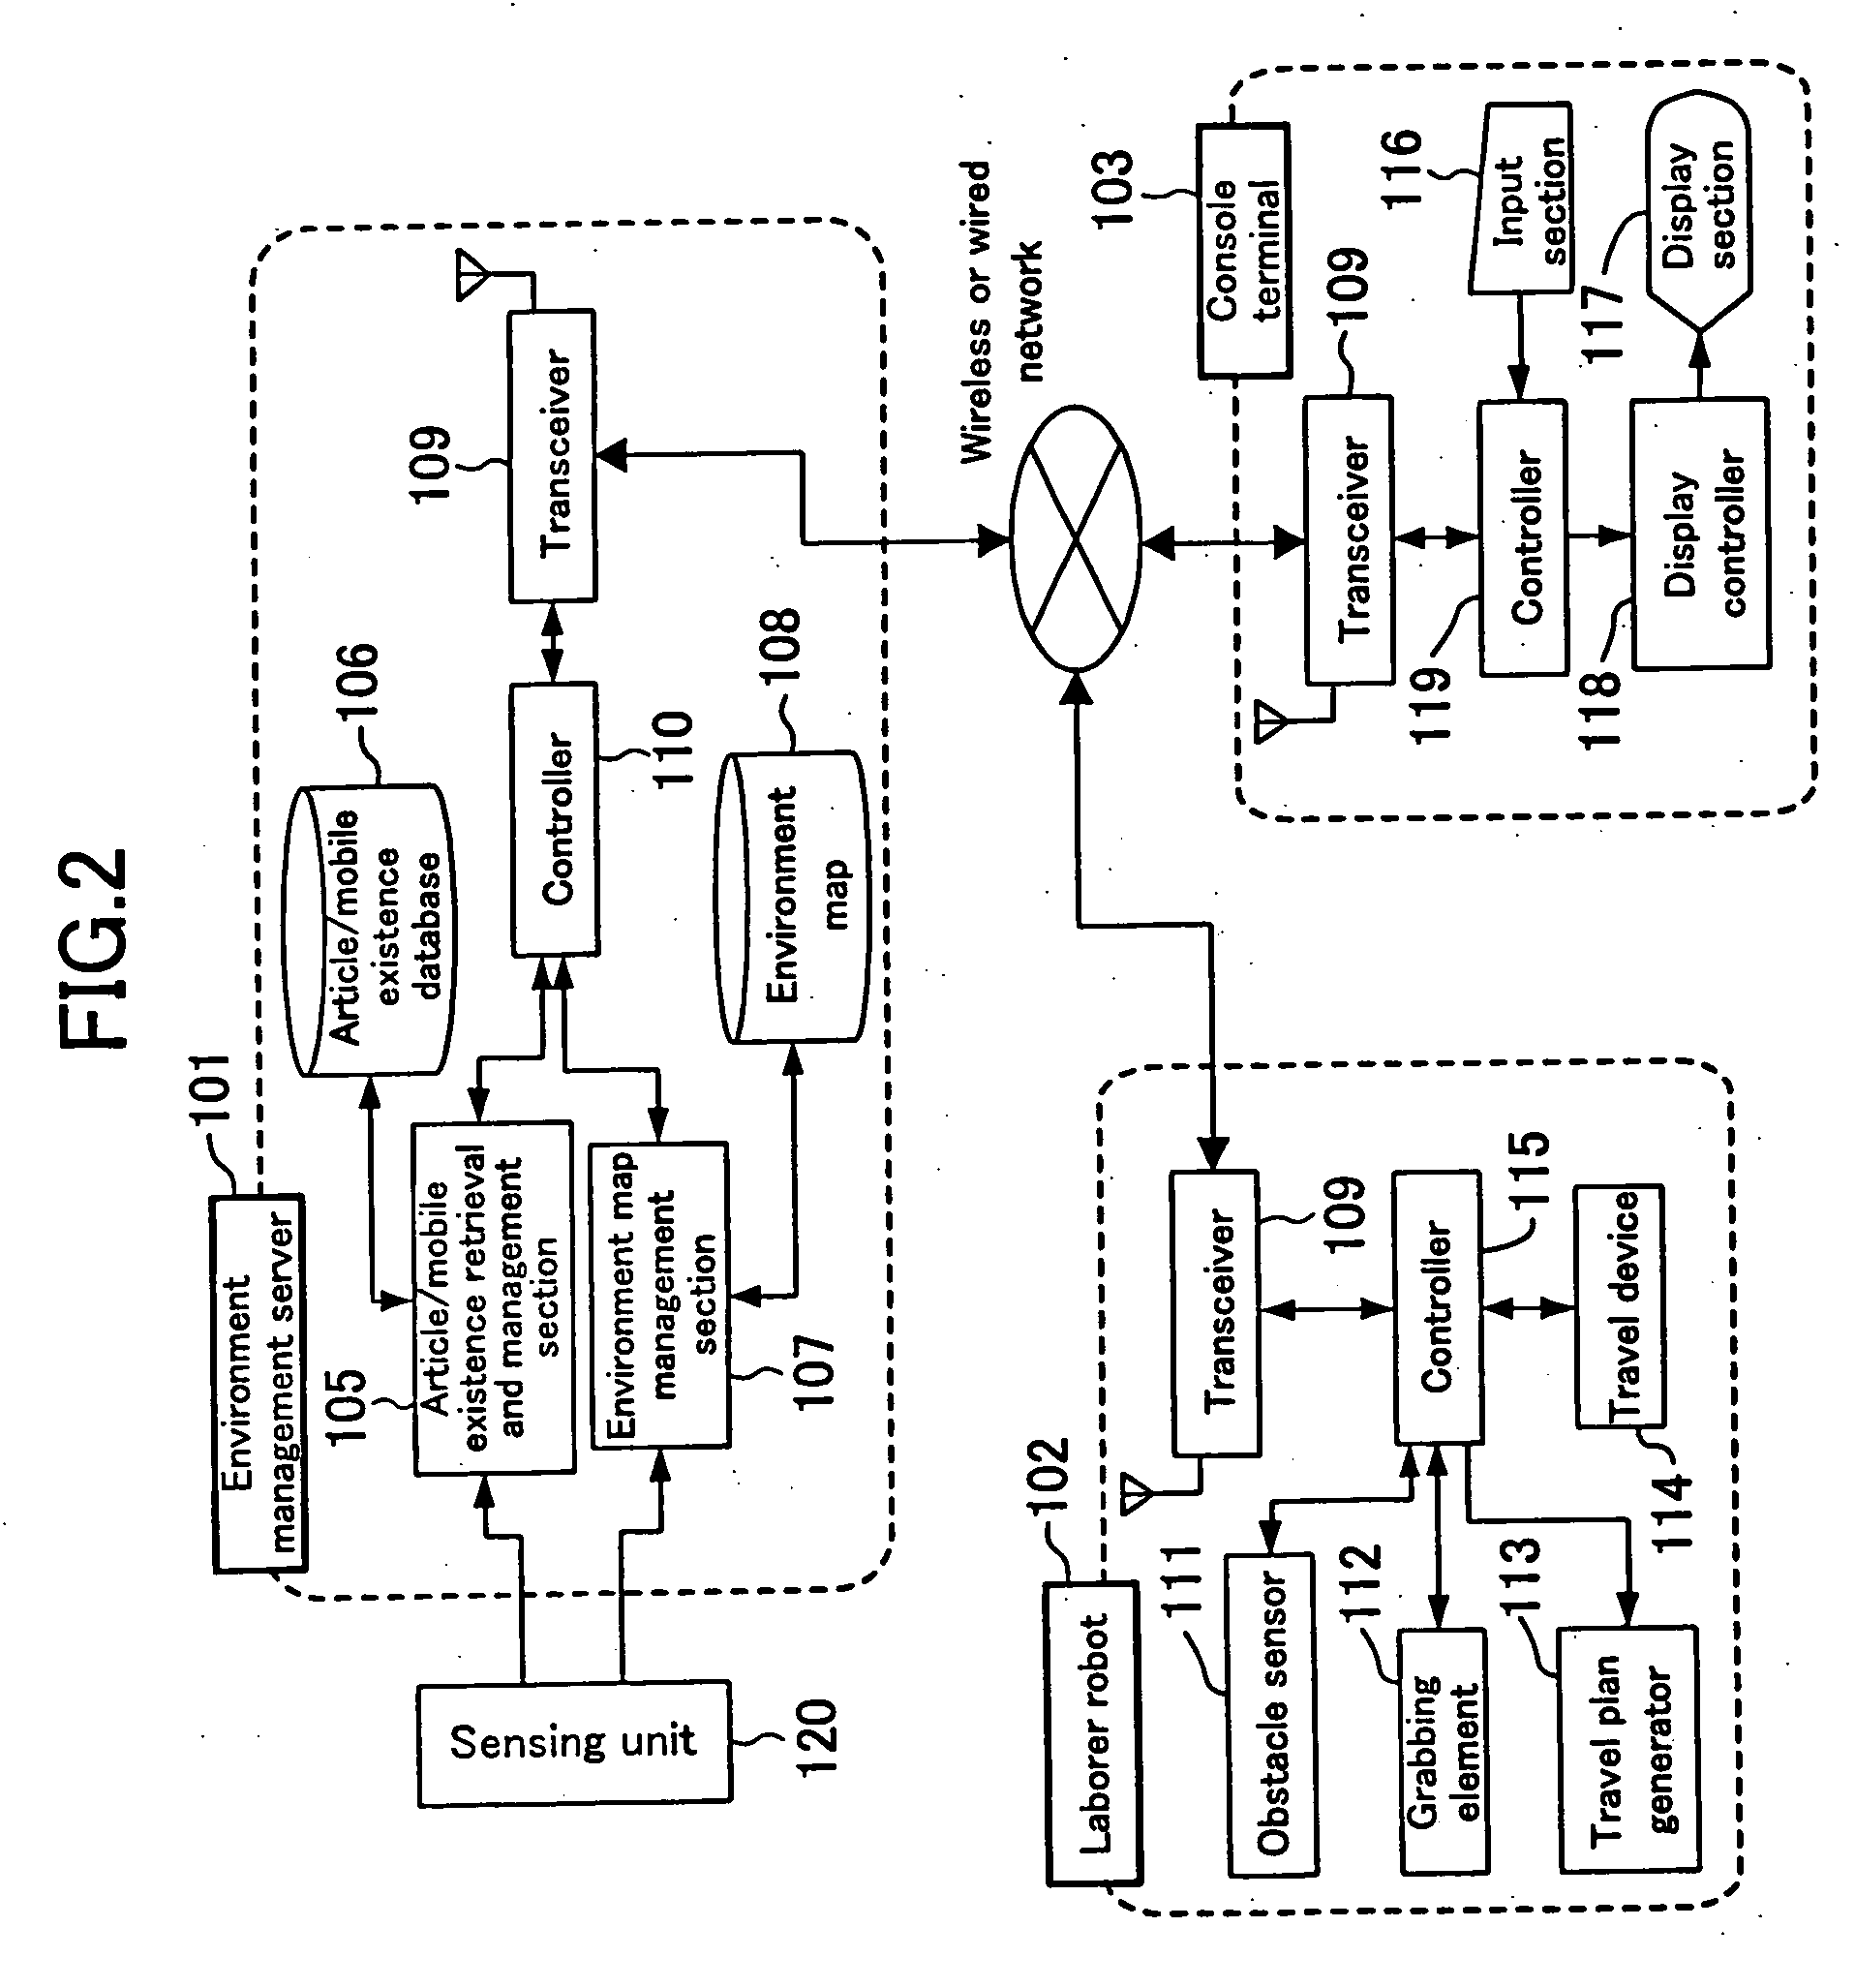 Article handling system and method and article management system and method